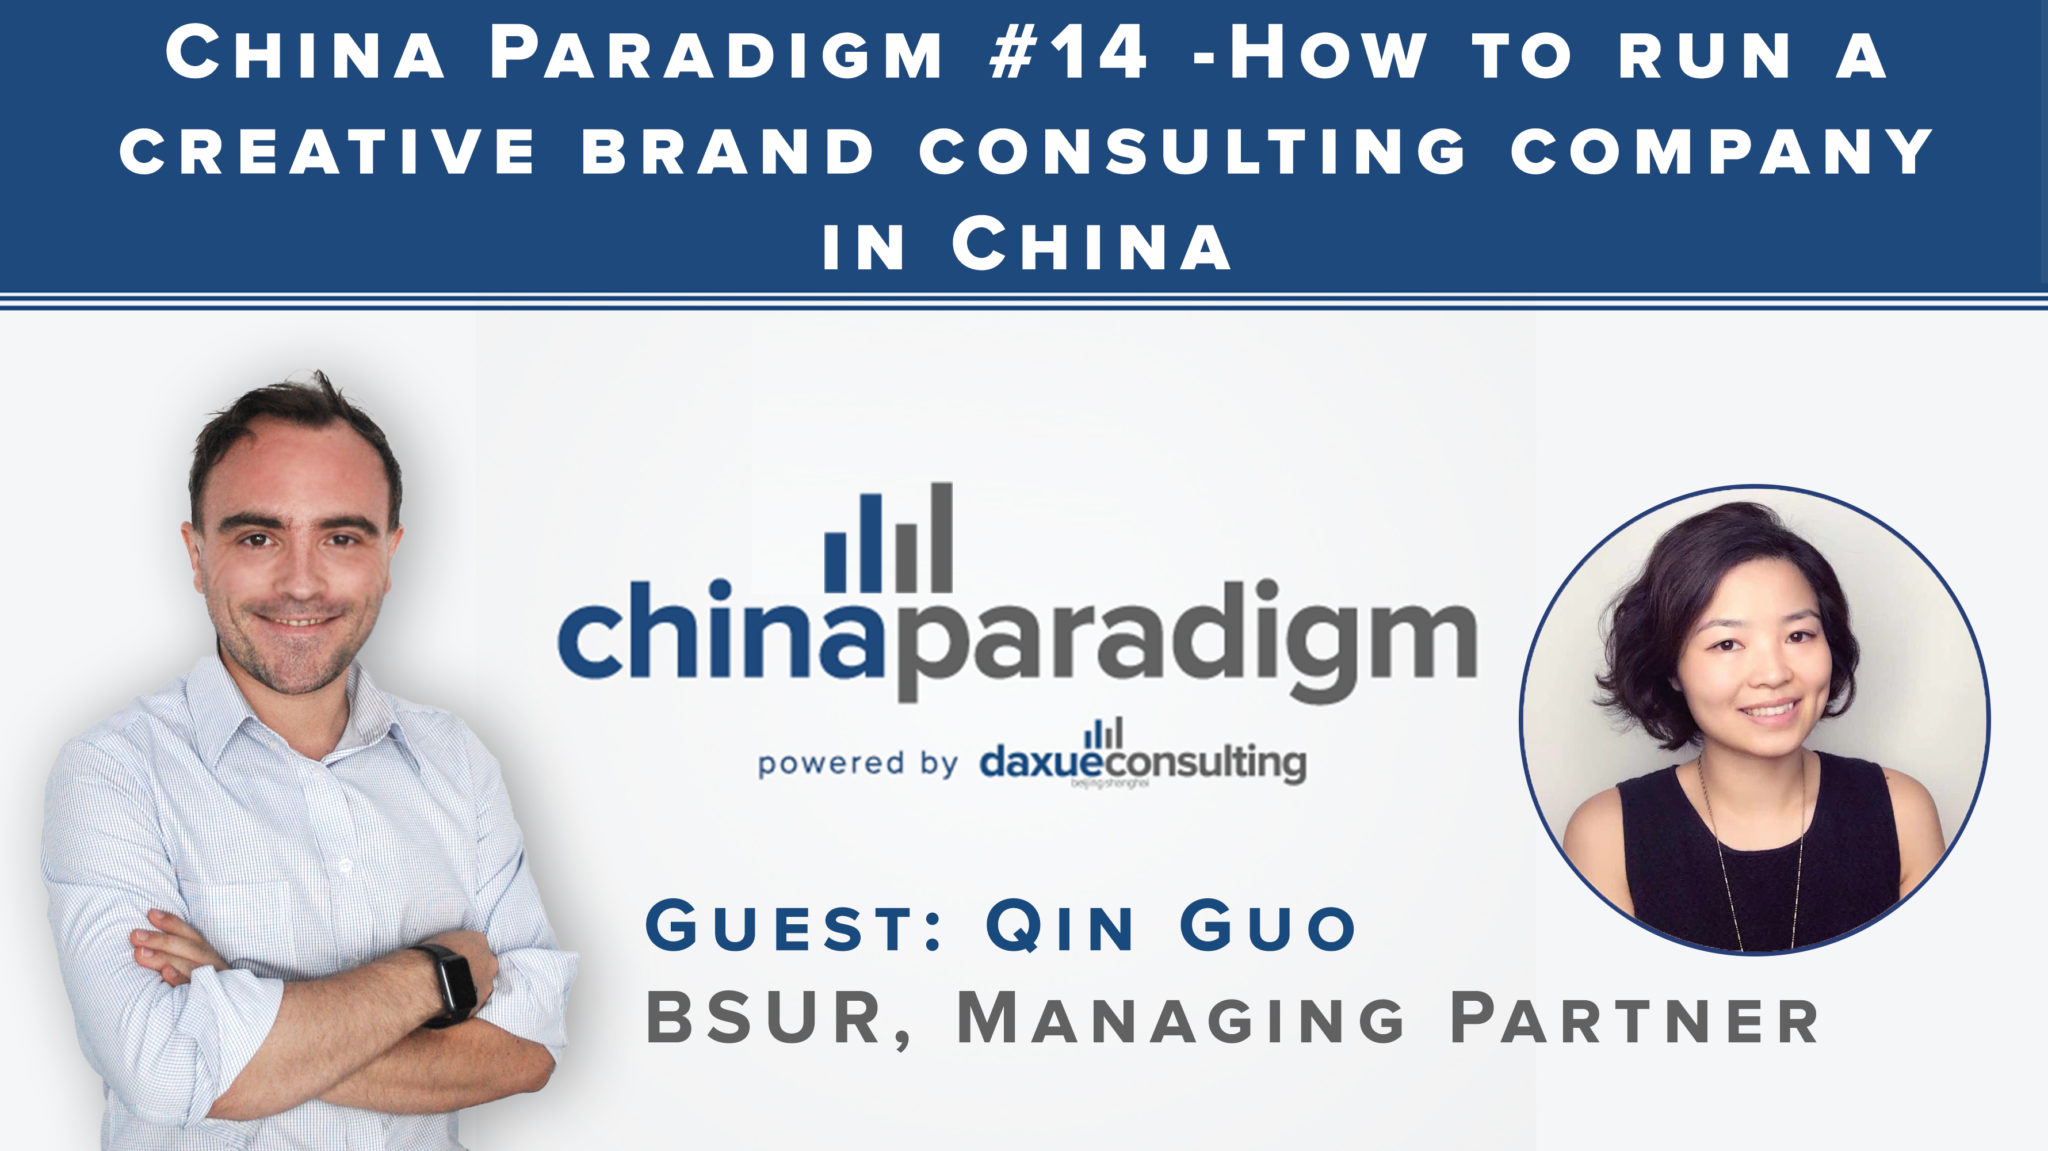 [Podcast] China paradigm #14: How to run a creative brand consulting company in China